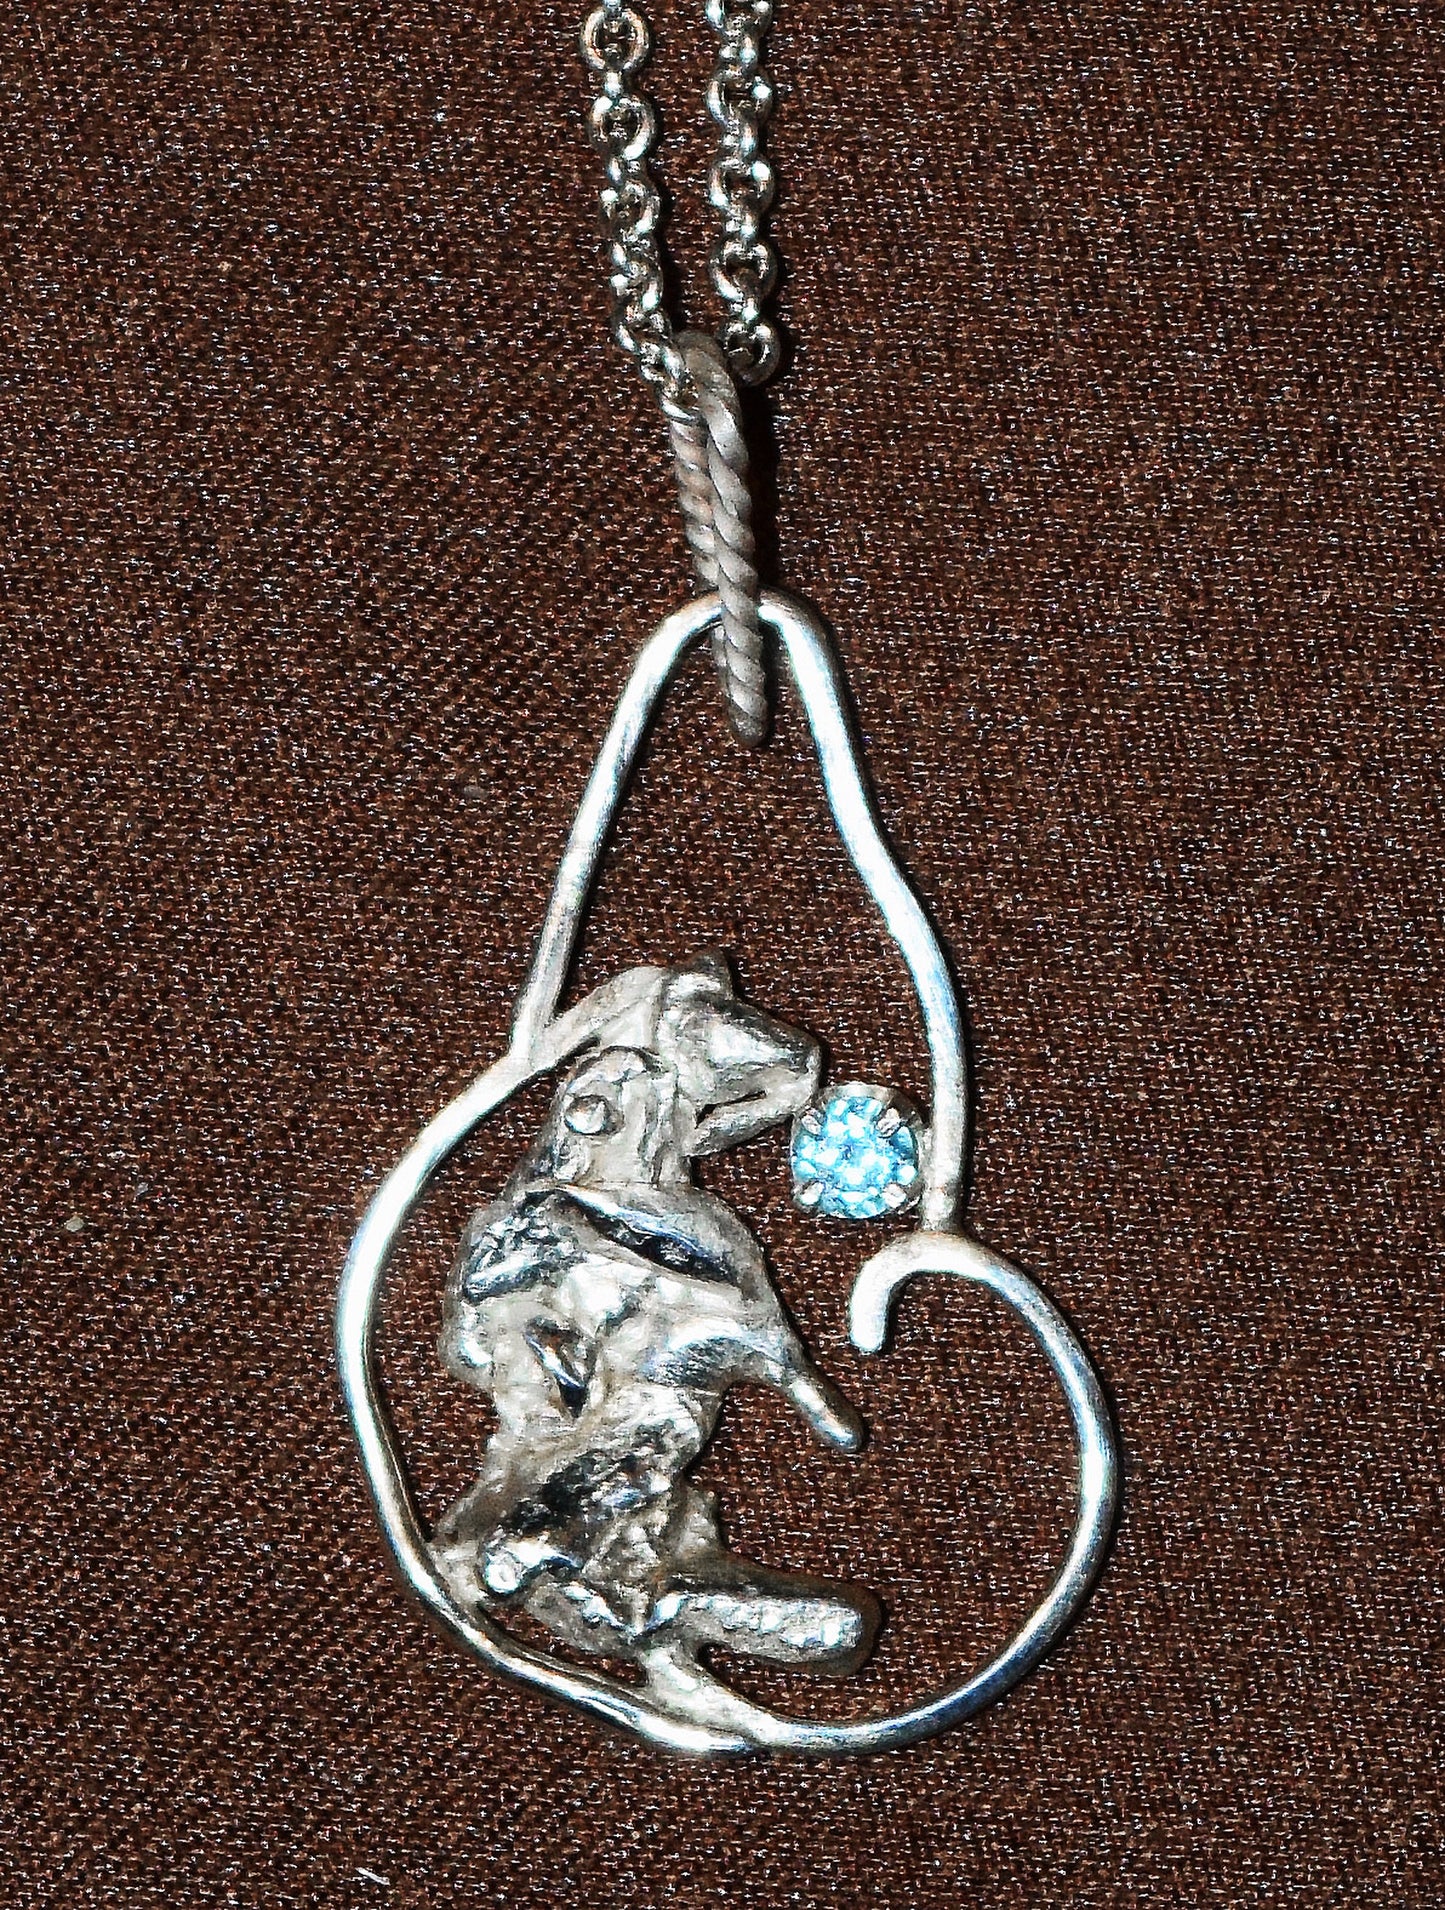 Handcrafted Sterling Silver pendant featuring a Blue Topaz gemstone. Includes a 18-inch Sterling necklace.